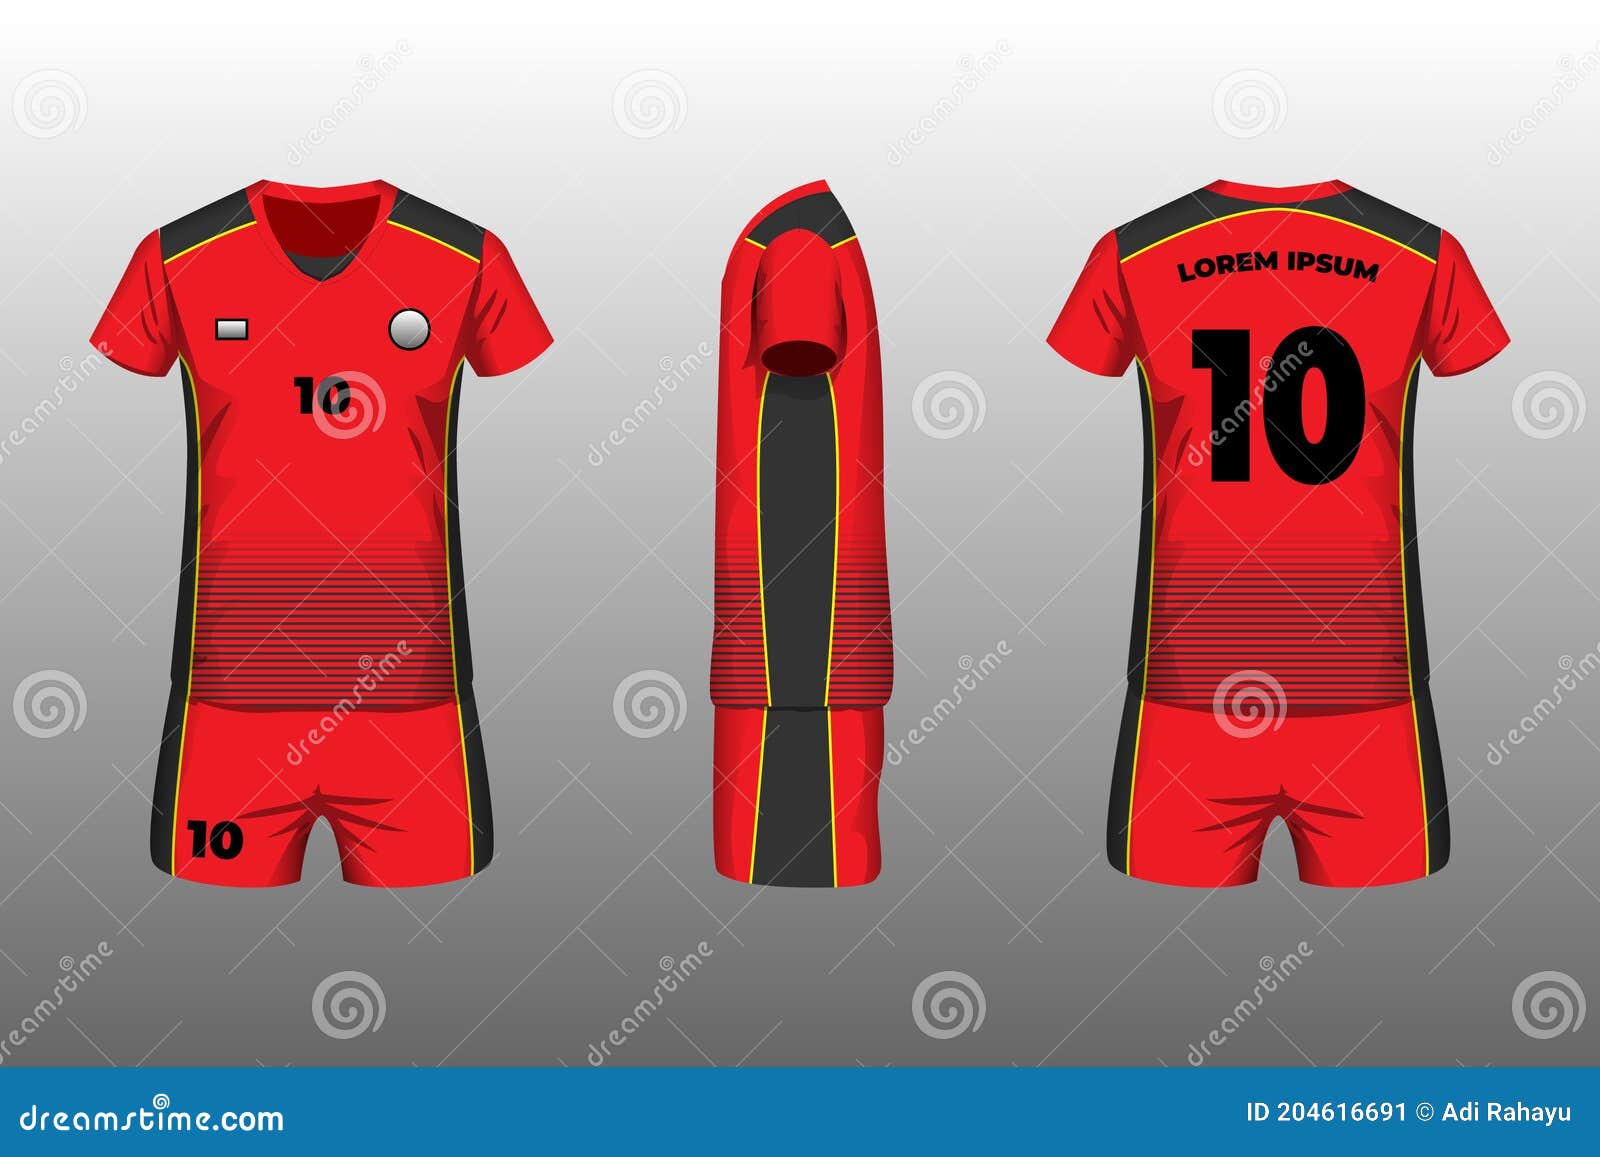 Download Volleyball Kit Jersey Mockup Design Red Champion Stock Vector Illustration Of Inspiration Printing 204616691